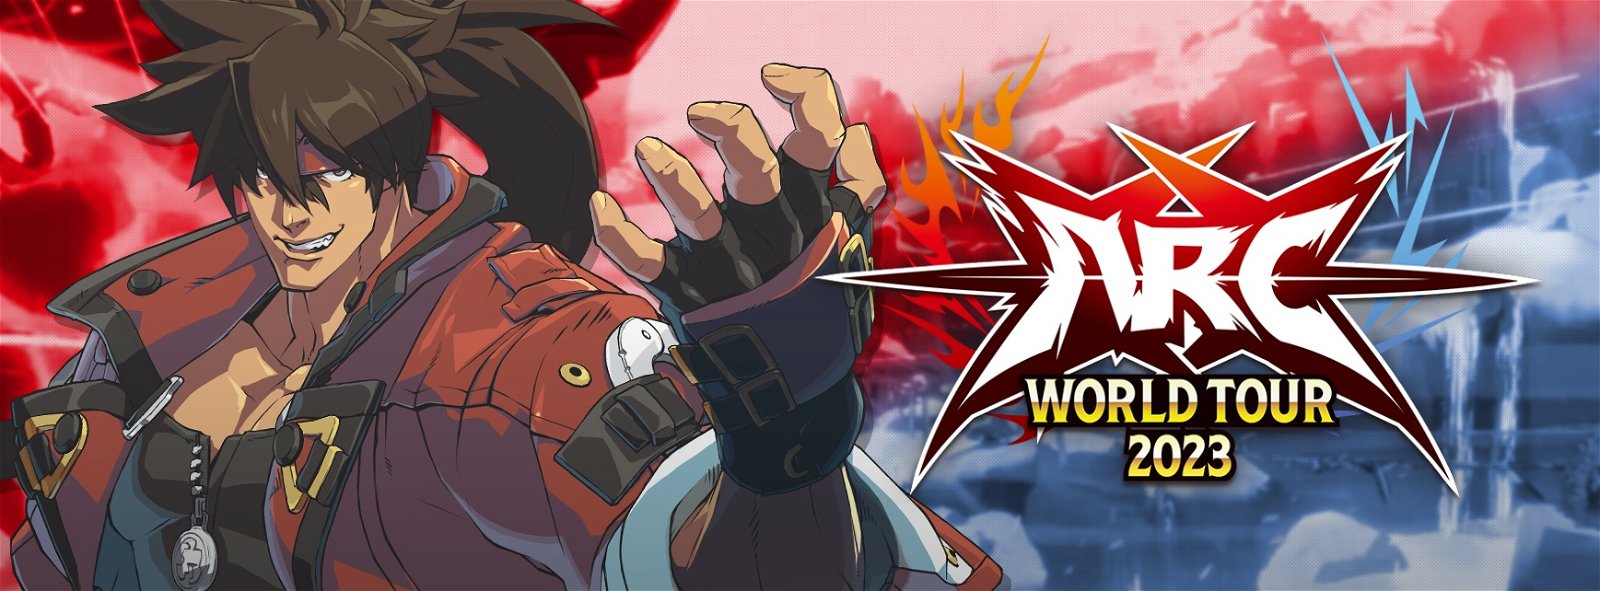 Arc System Works Launches New Website Amp Arc World Tour 2023 23051205 1